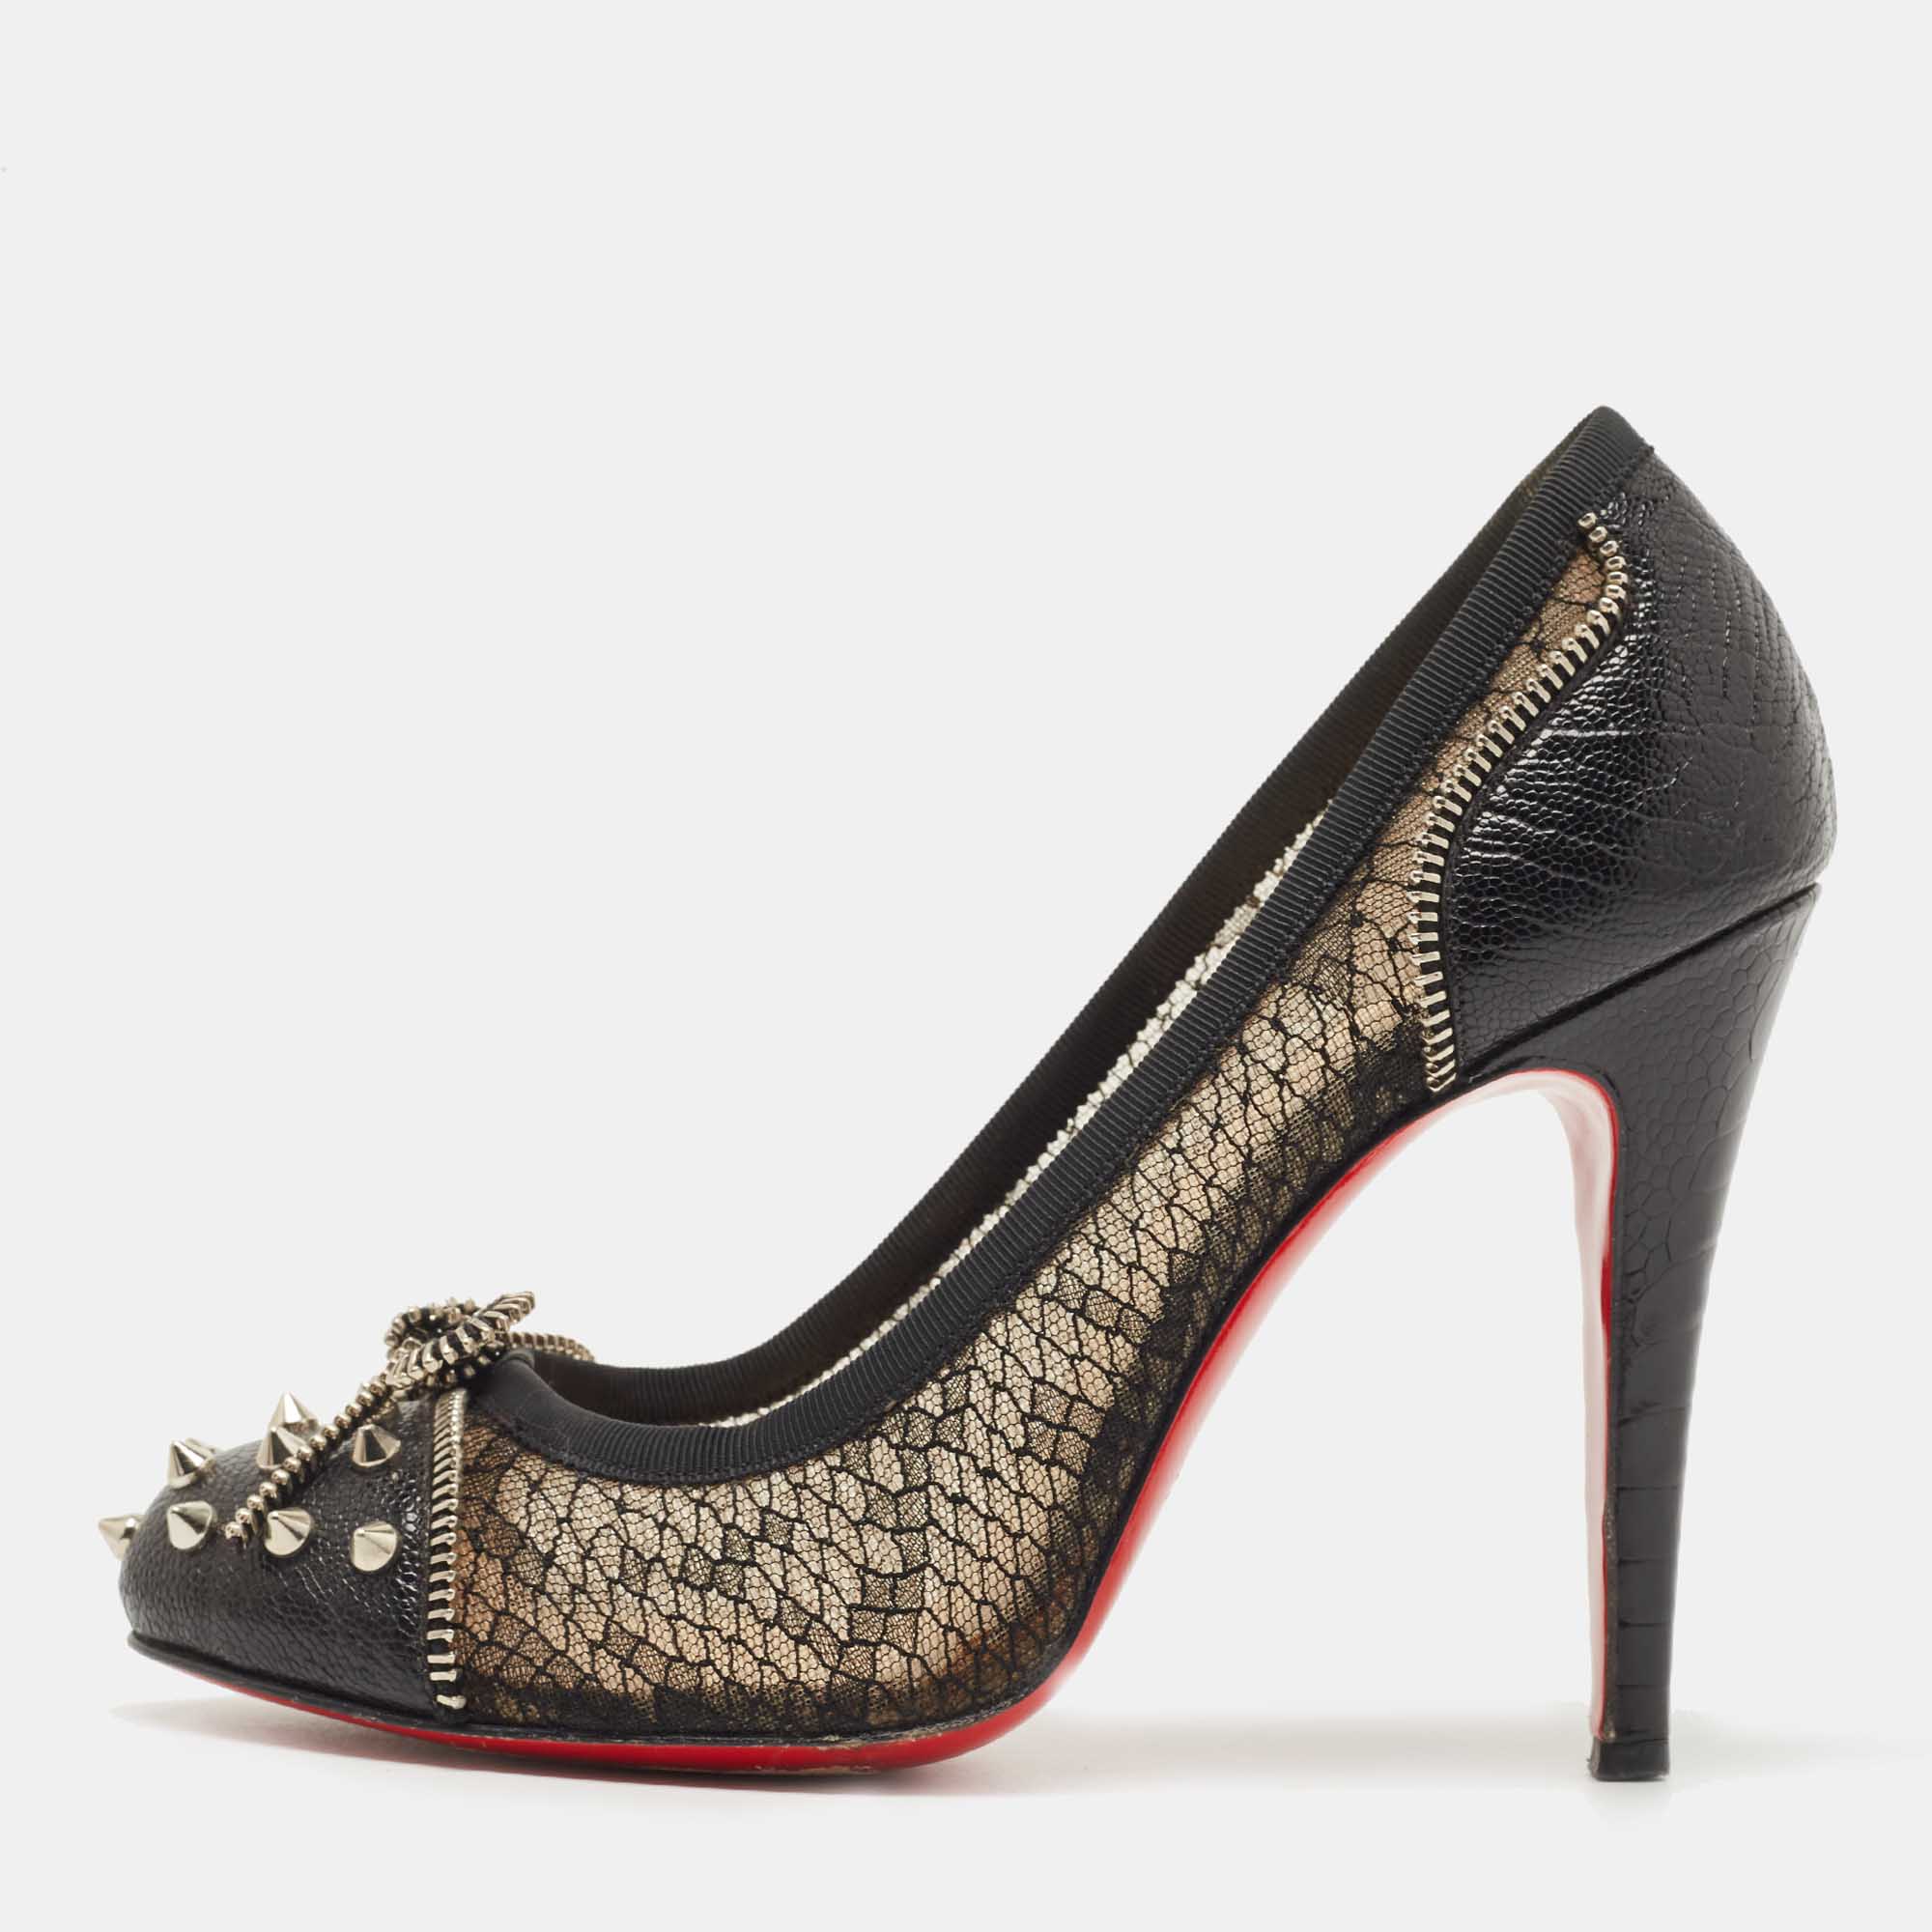 Christian louboutin black leather and lace candy spiked pumps size 38